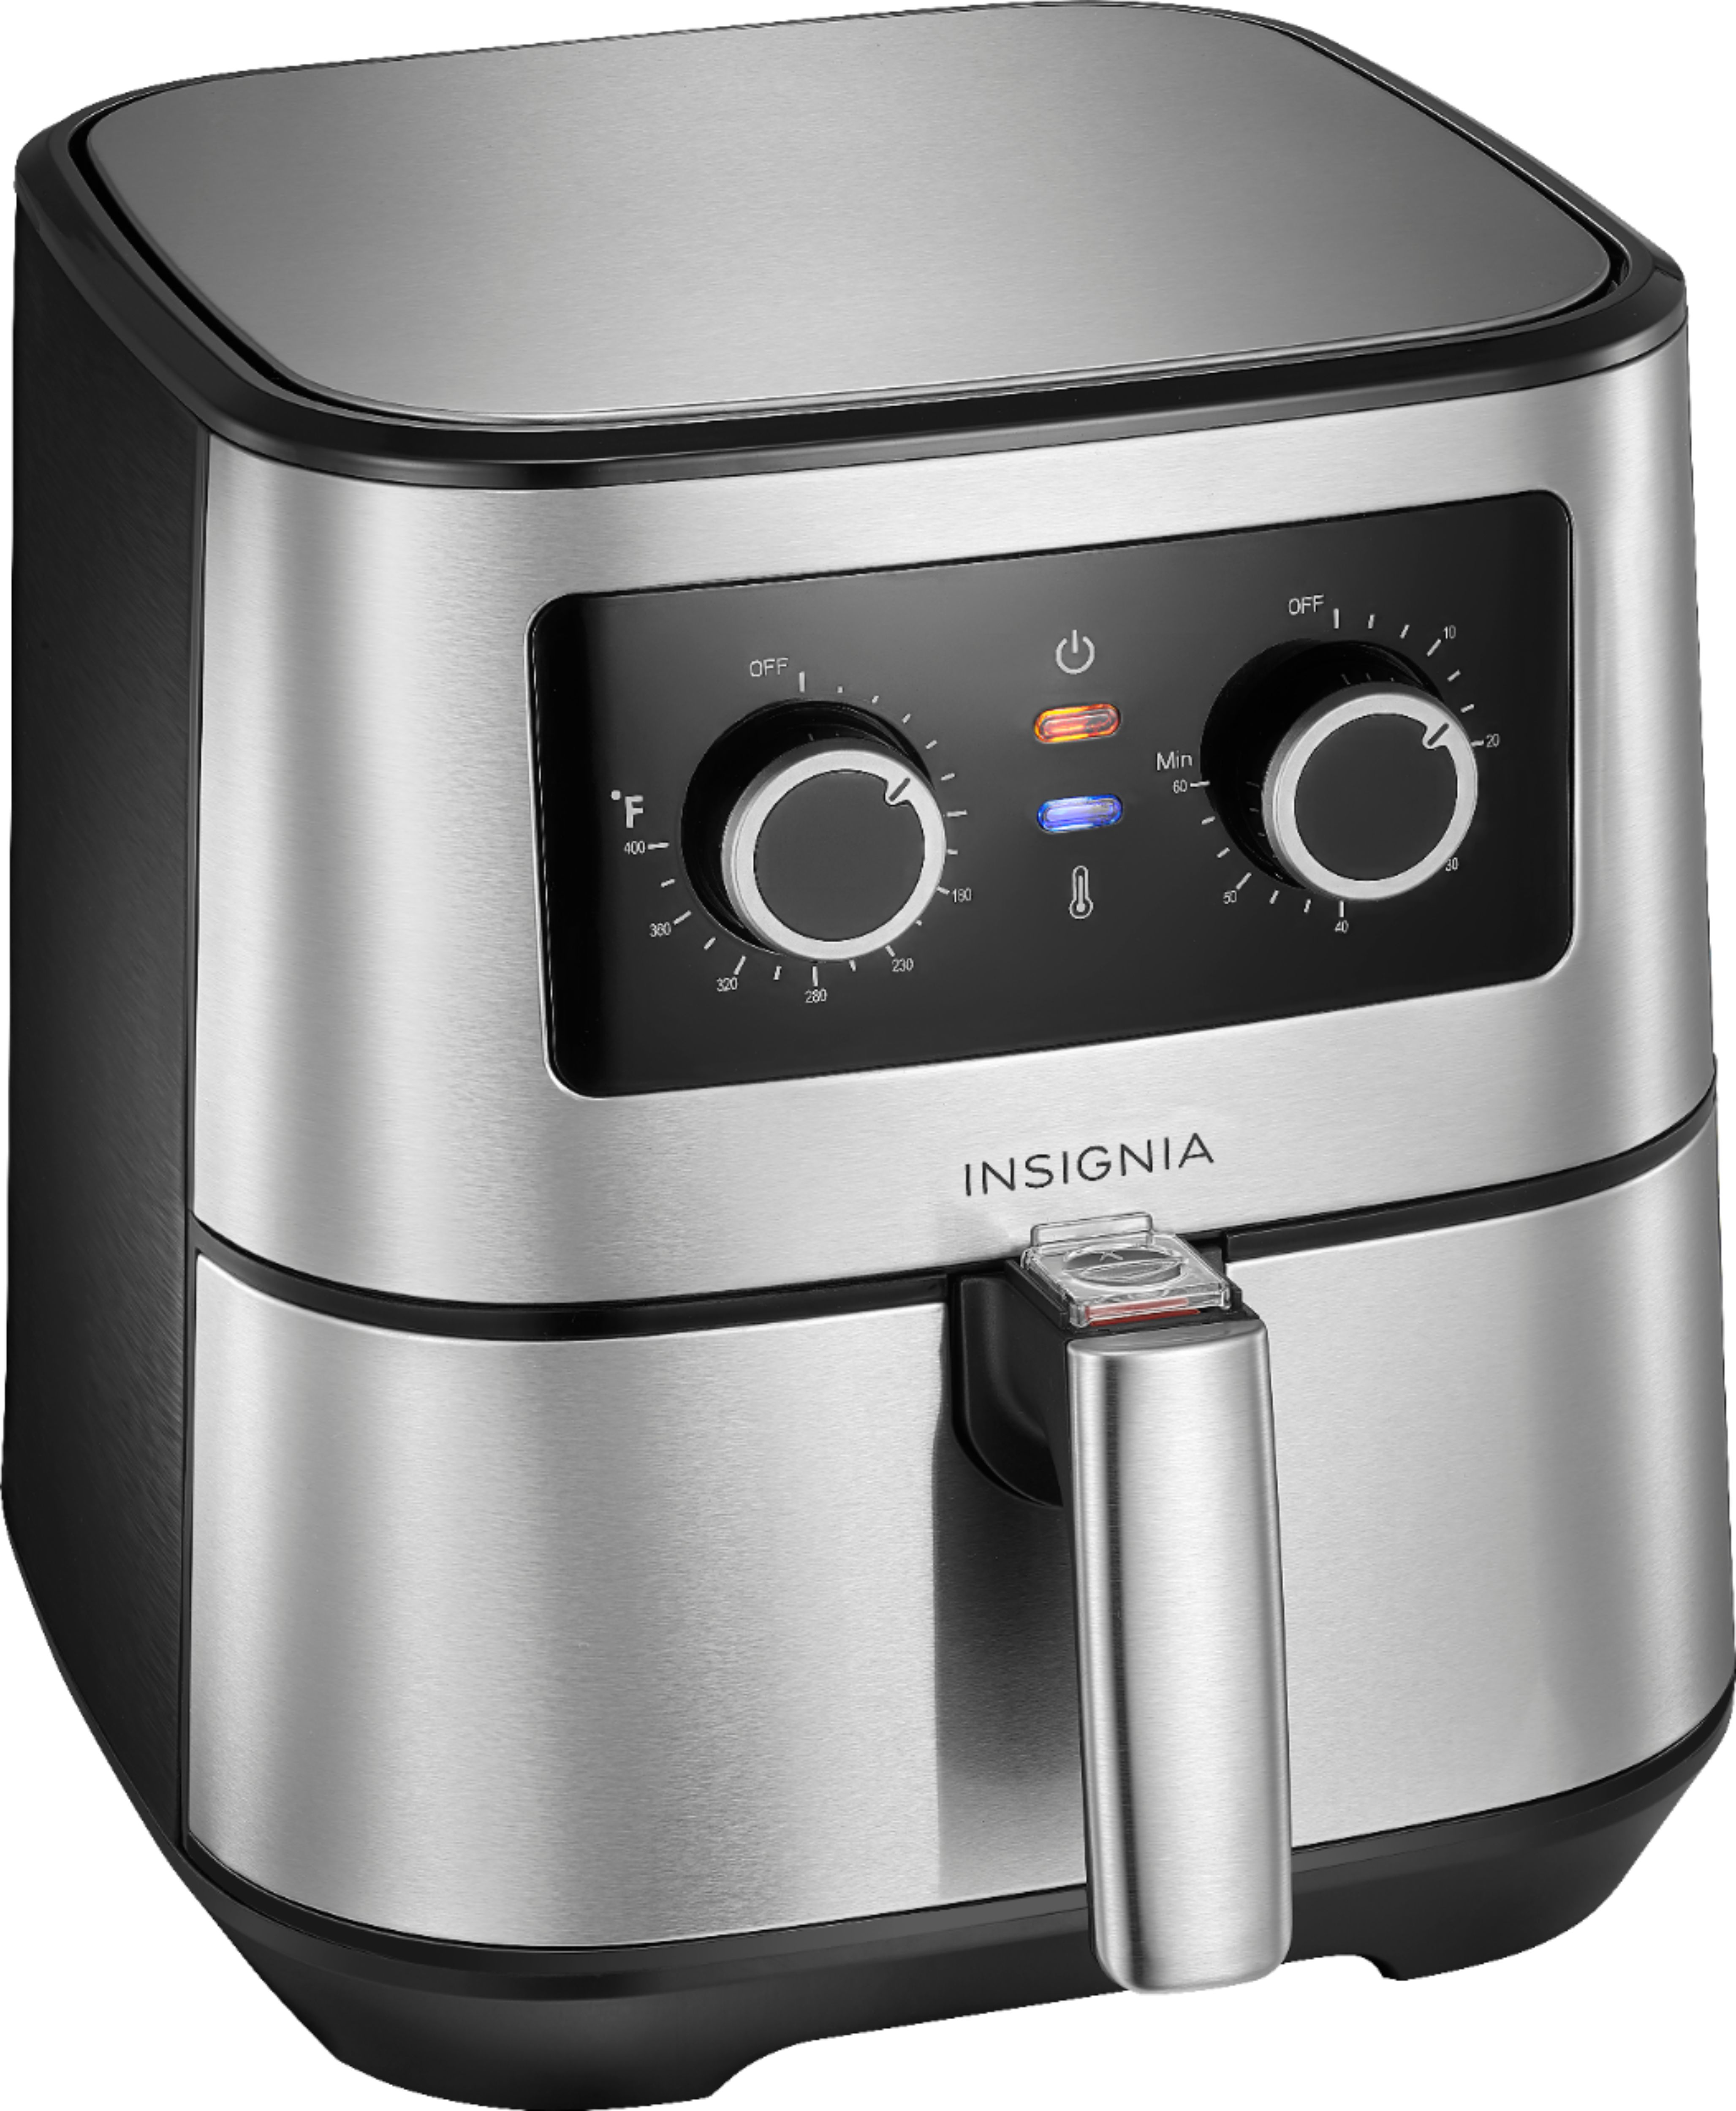 Angle View: Insignia™ - 5-qt. Digital Air Fryer - Stainless Steel